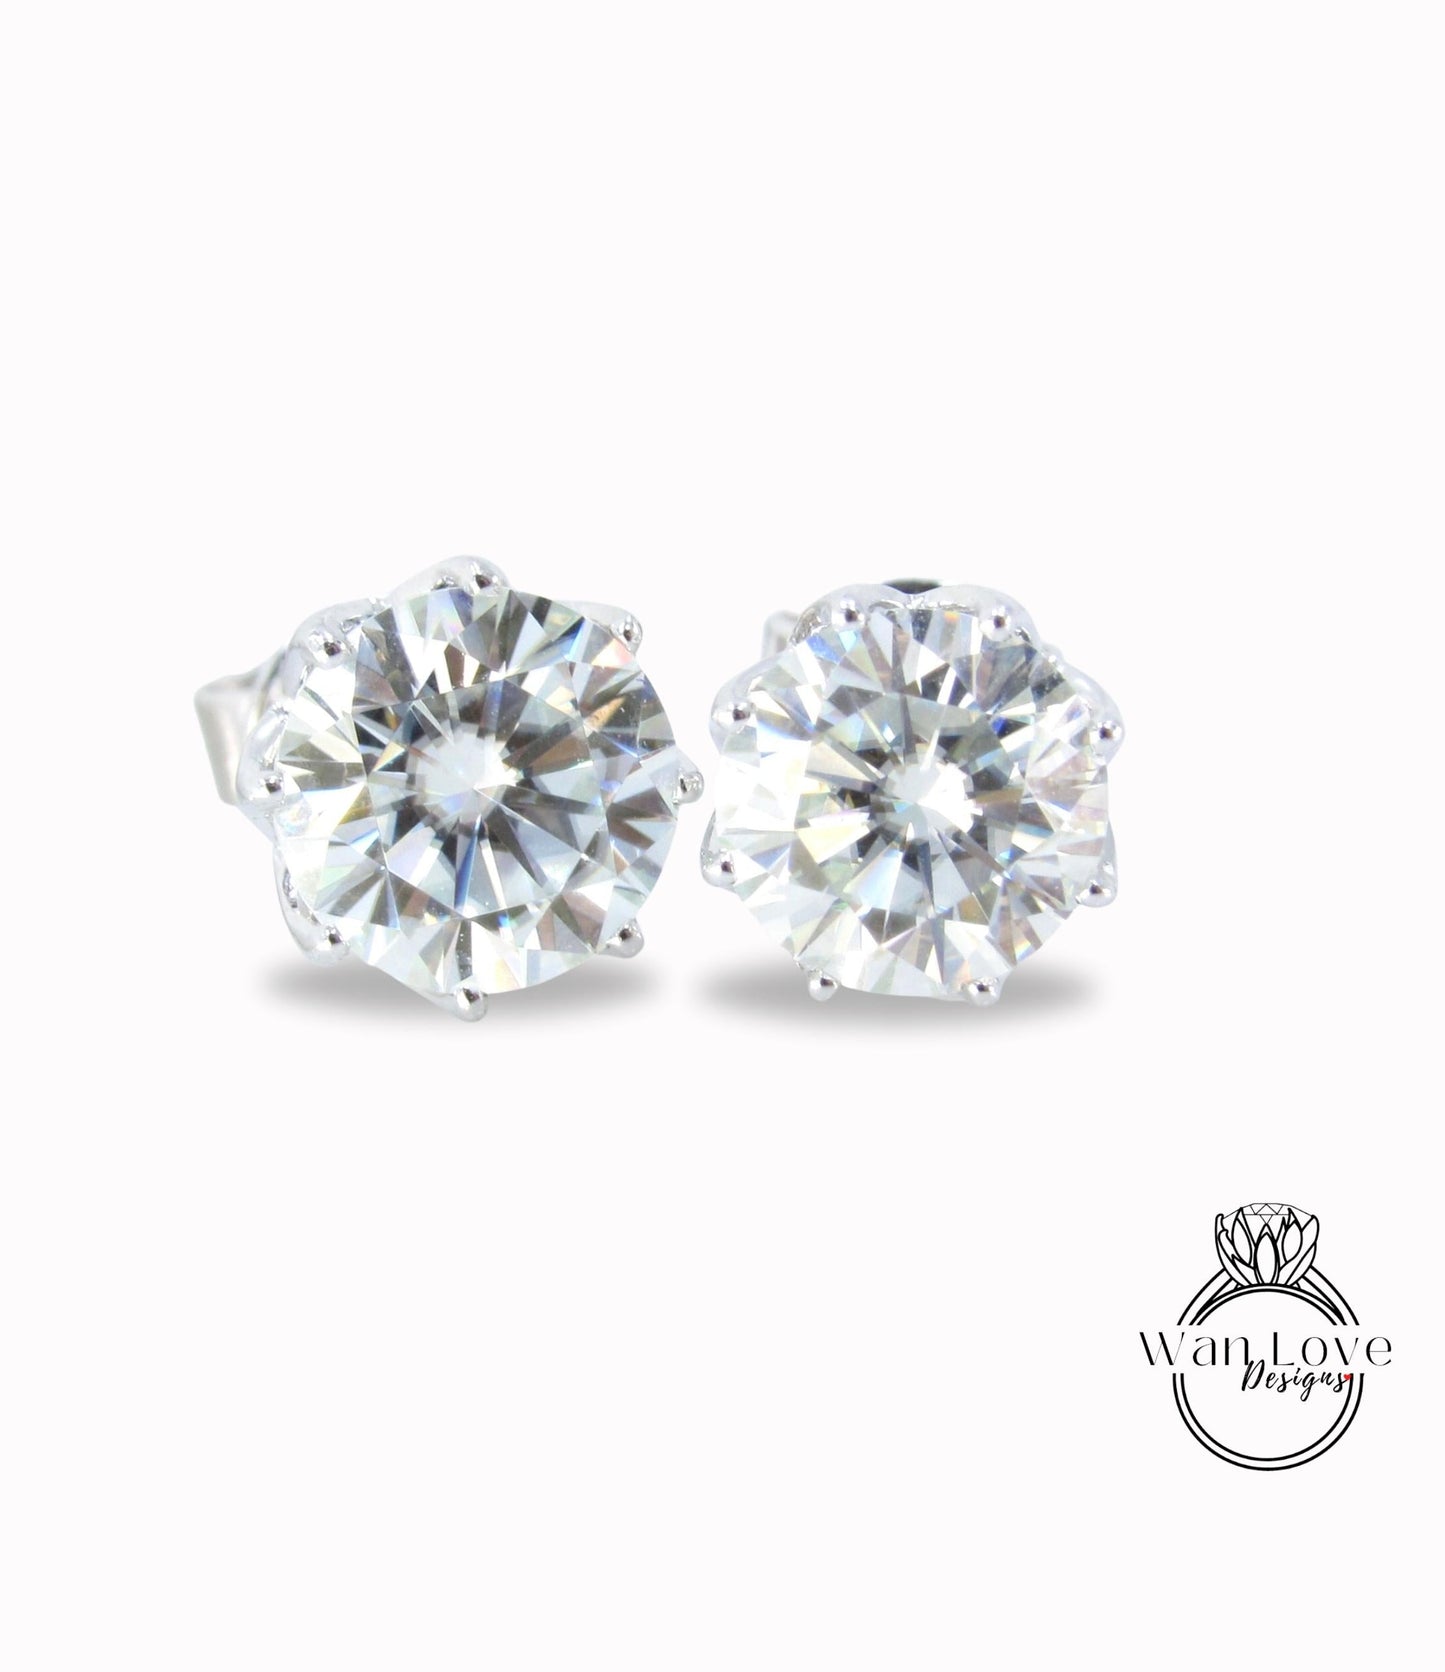 Moissanite Earrings Round cut studs 8 Prongs Screw Back, 1ct each, 2ct total weight, 6.5mm,Custom, White Gold,Anniversary Gift-Ready to Ship Wan Love Designs